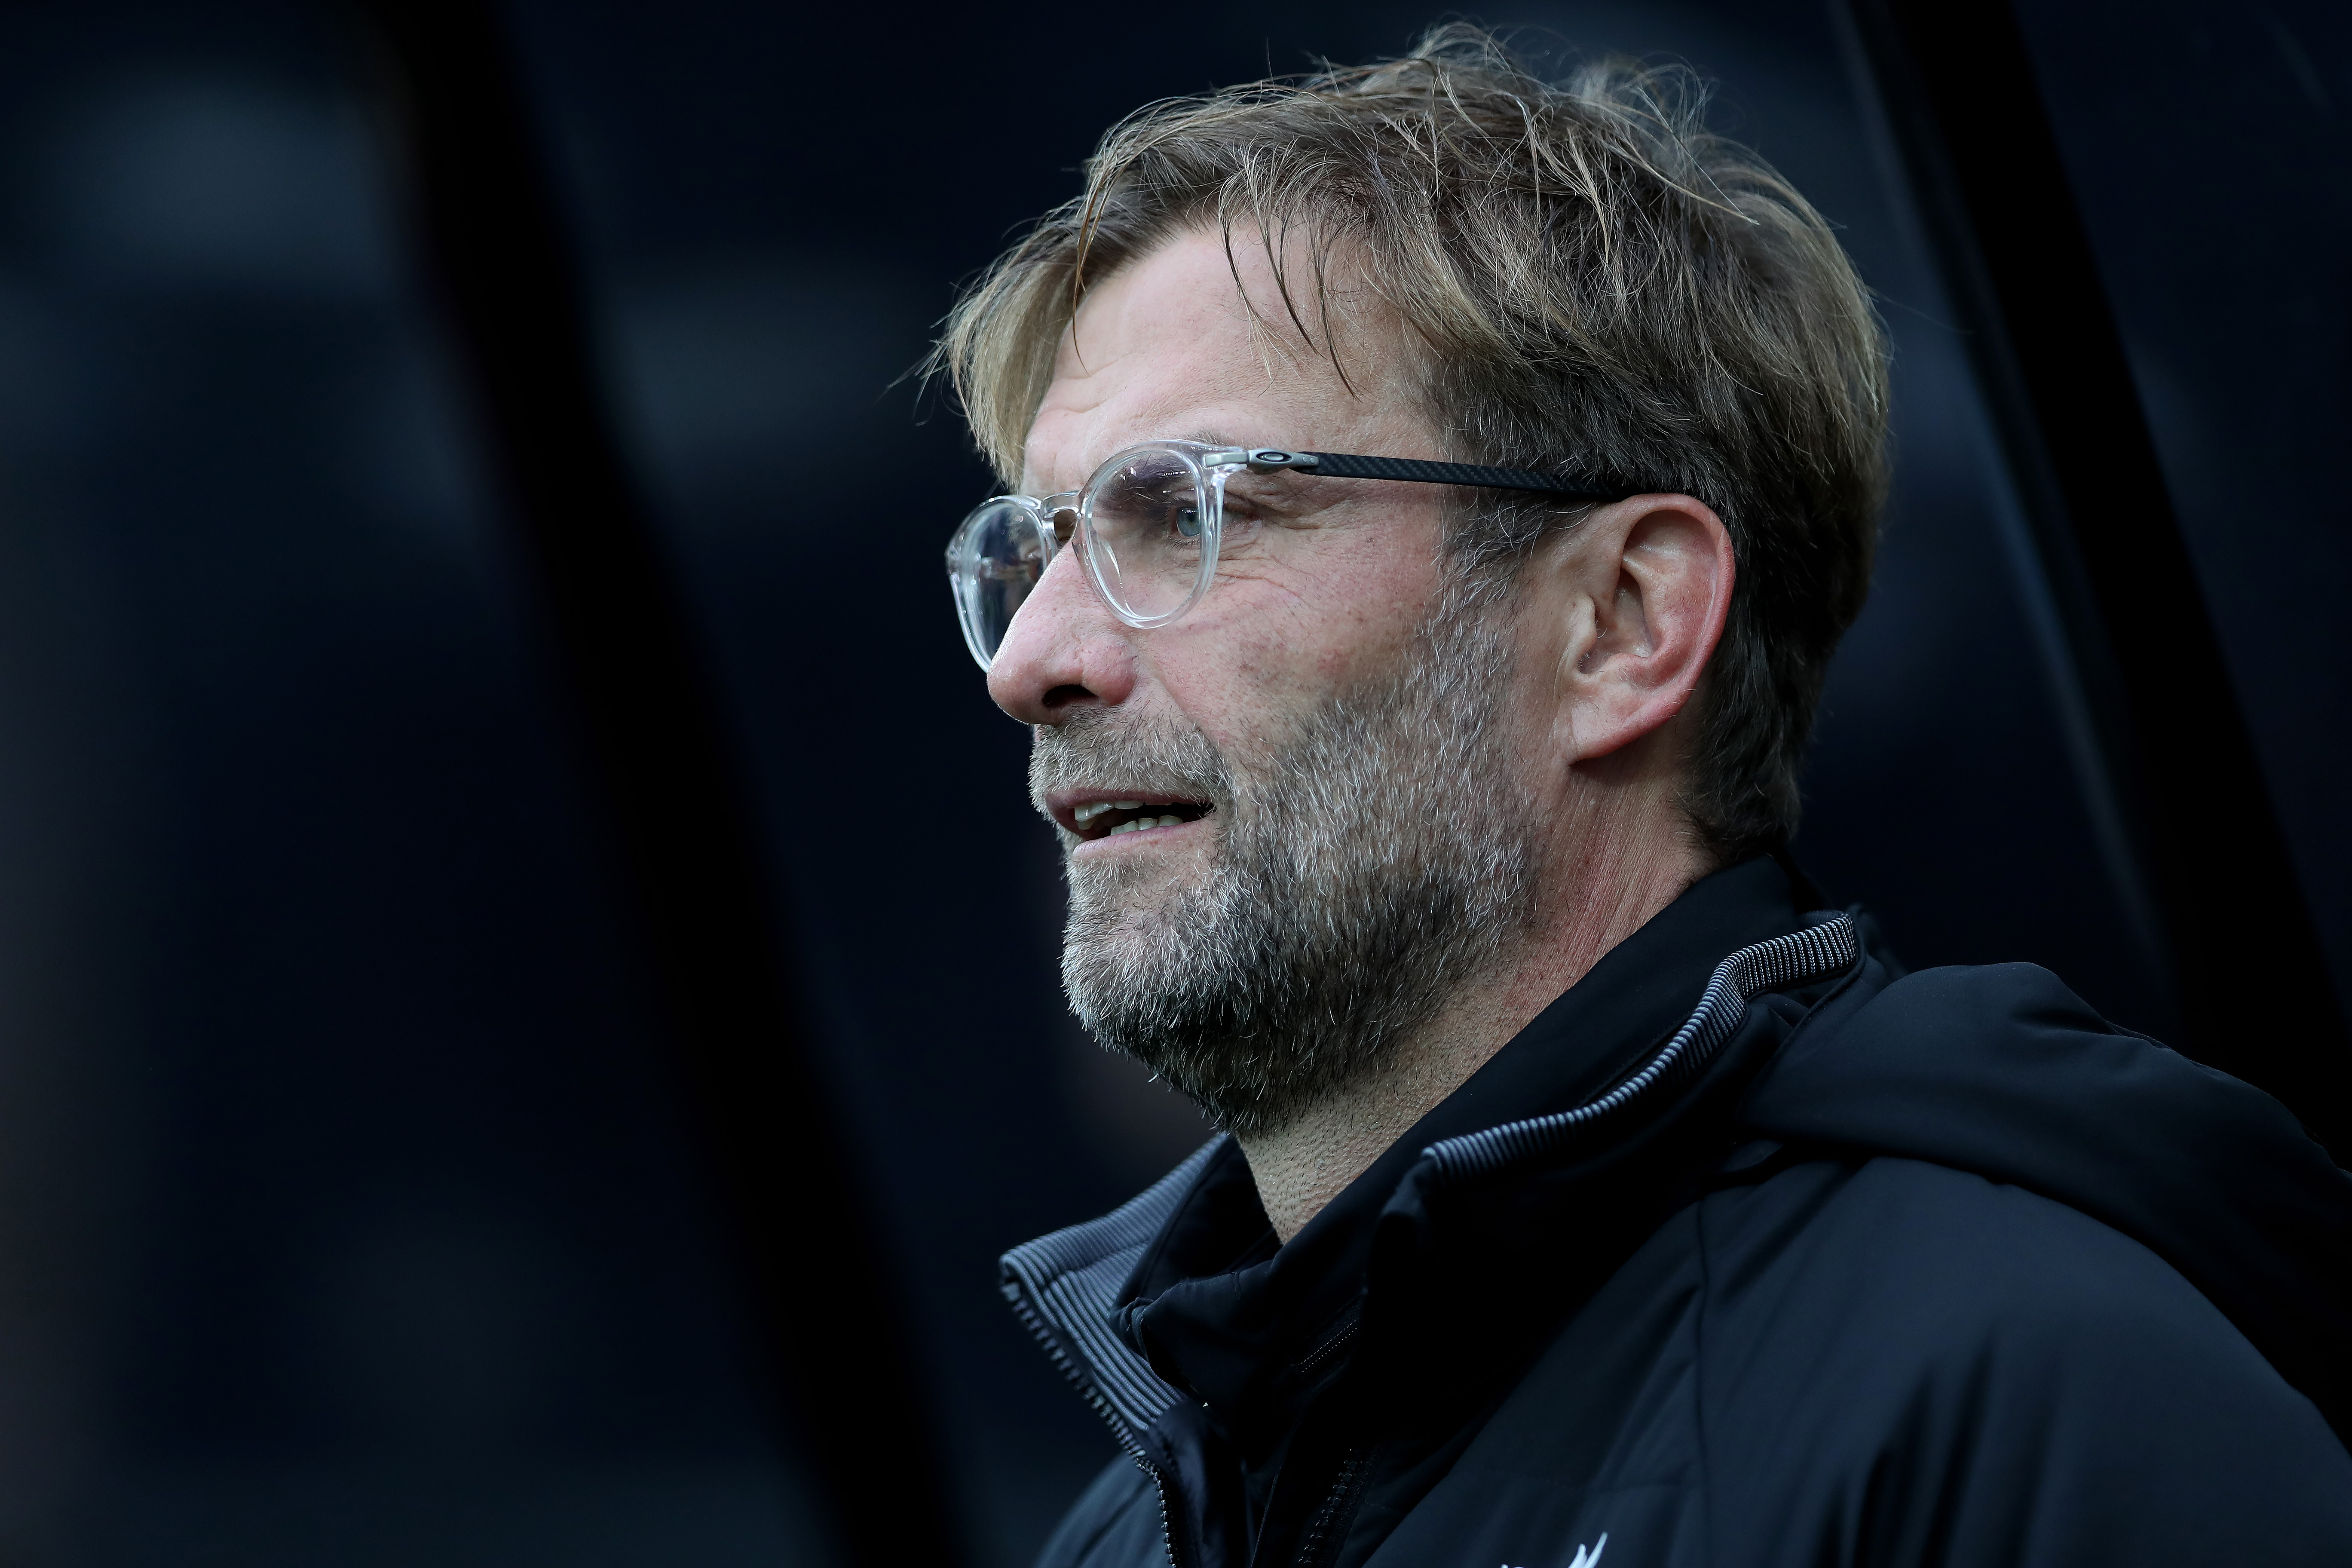 NEWCASTLE UPON TYNE, ENGLAND - OCTOBER 01: Liverpool manager Jurgen Klopp looks on during the Premier League match between Newcastle United and Liverpool at St. James Park on October 1, 2017 in Newcastle upon Tyne, England. (Photo by Ian MacNicol/Getty Images)